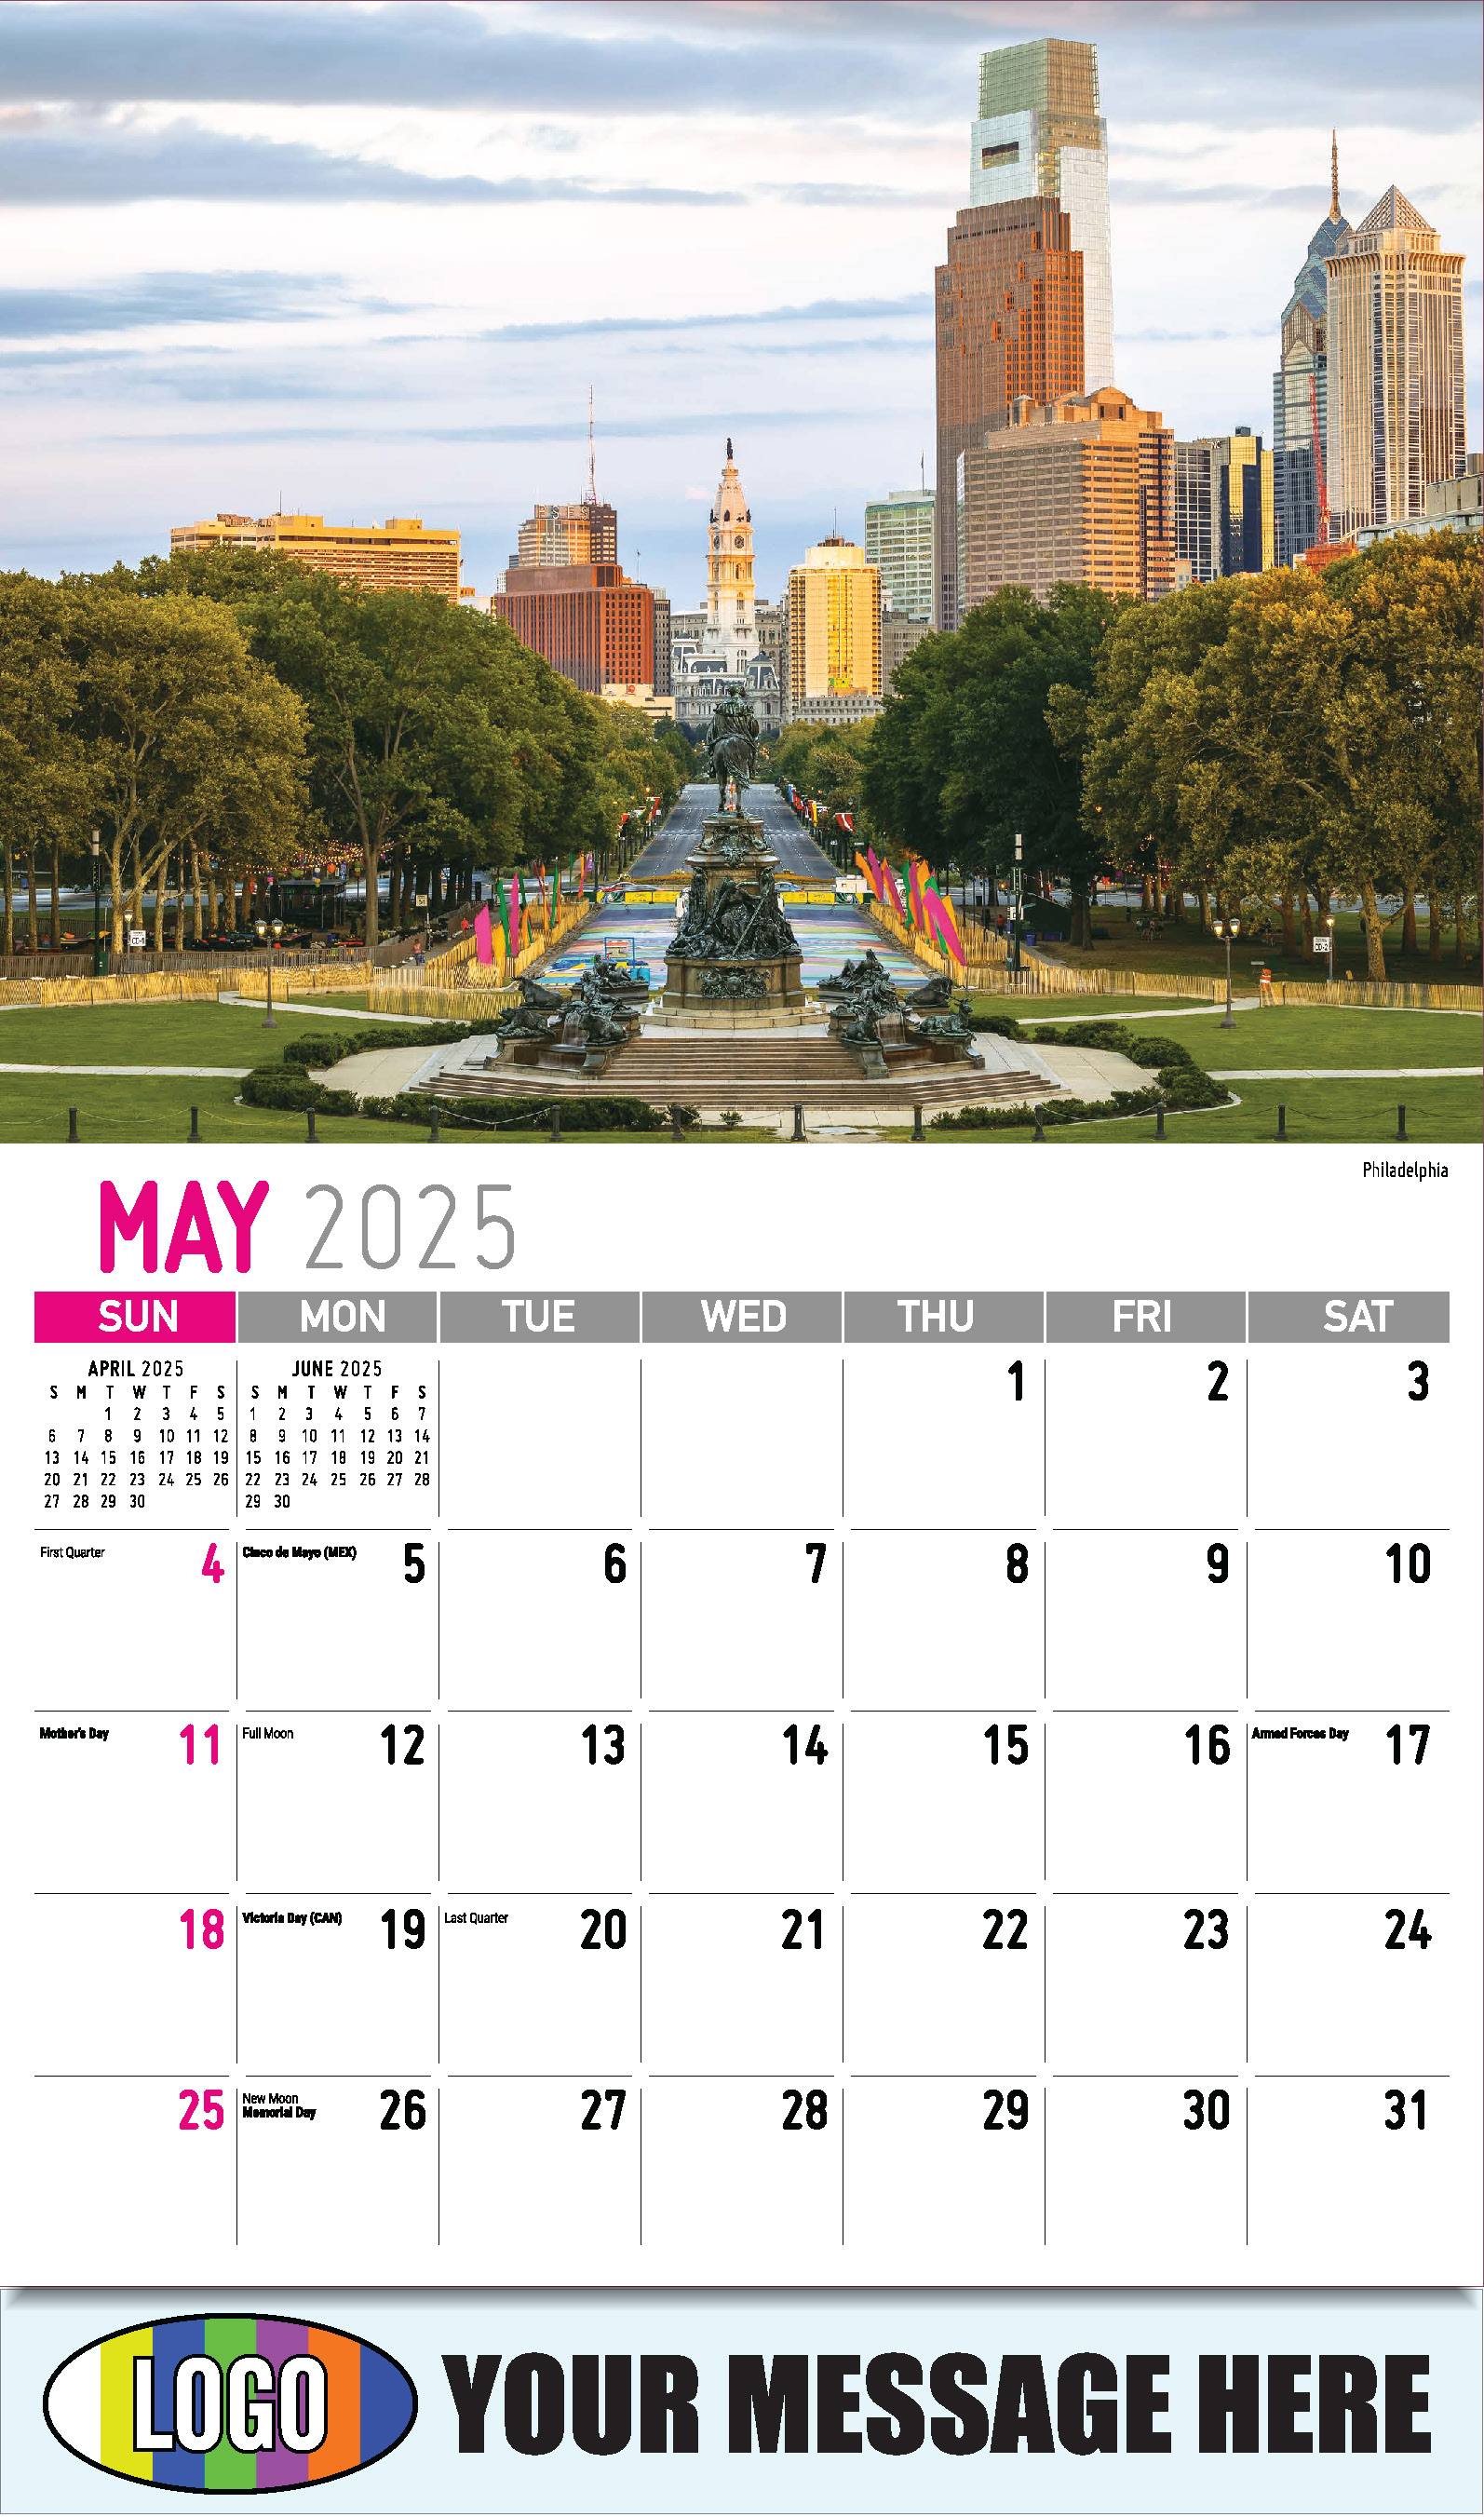 Scenes of Pennsylvania 2025 Business Promotion Calendar - May